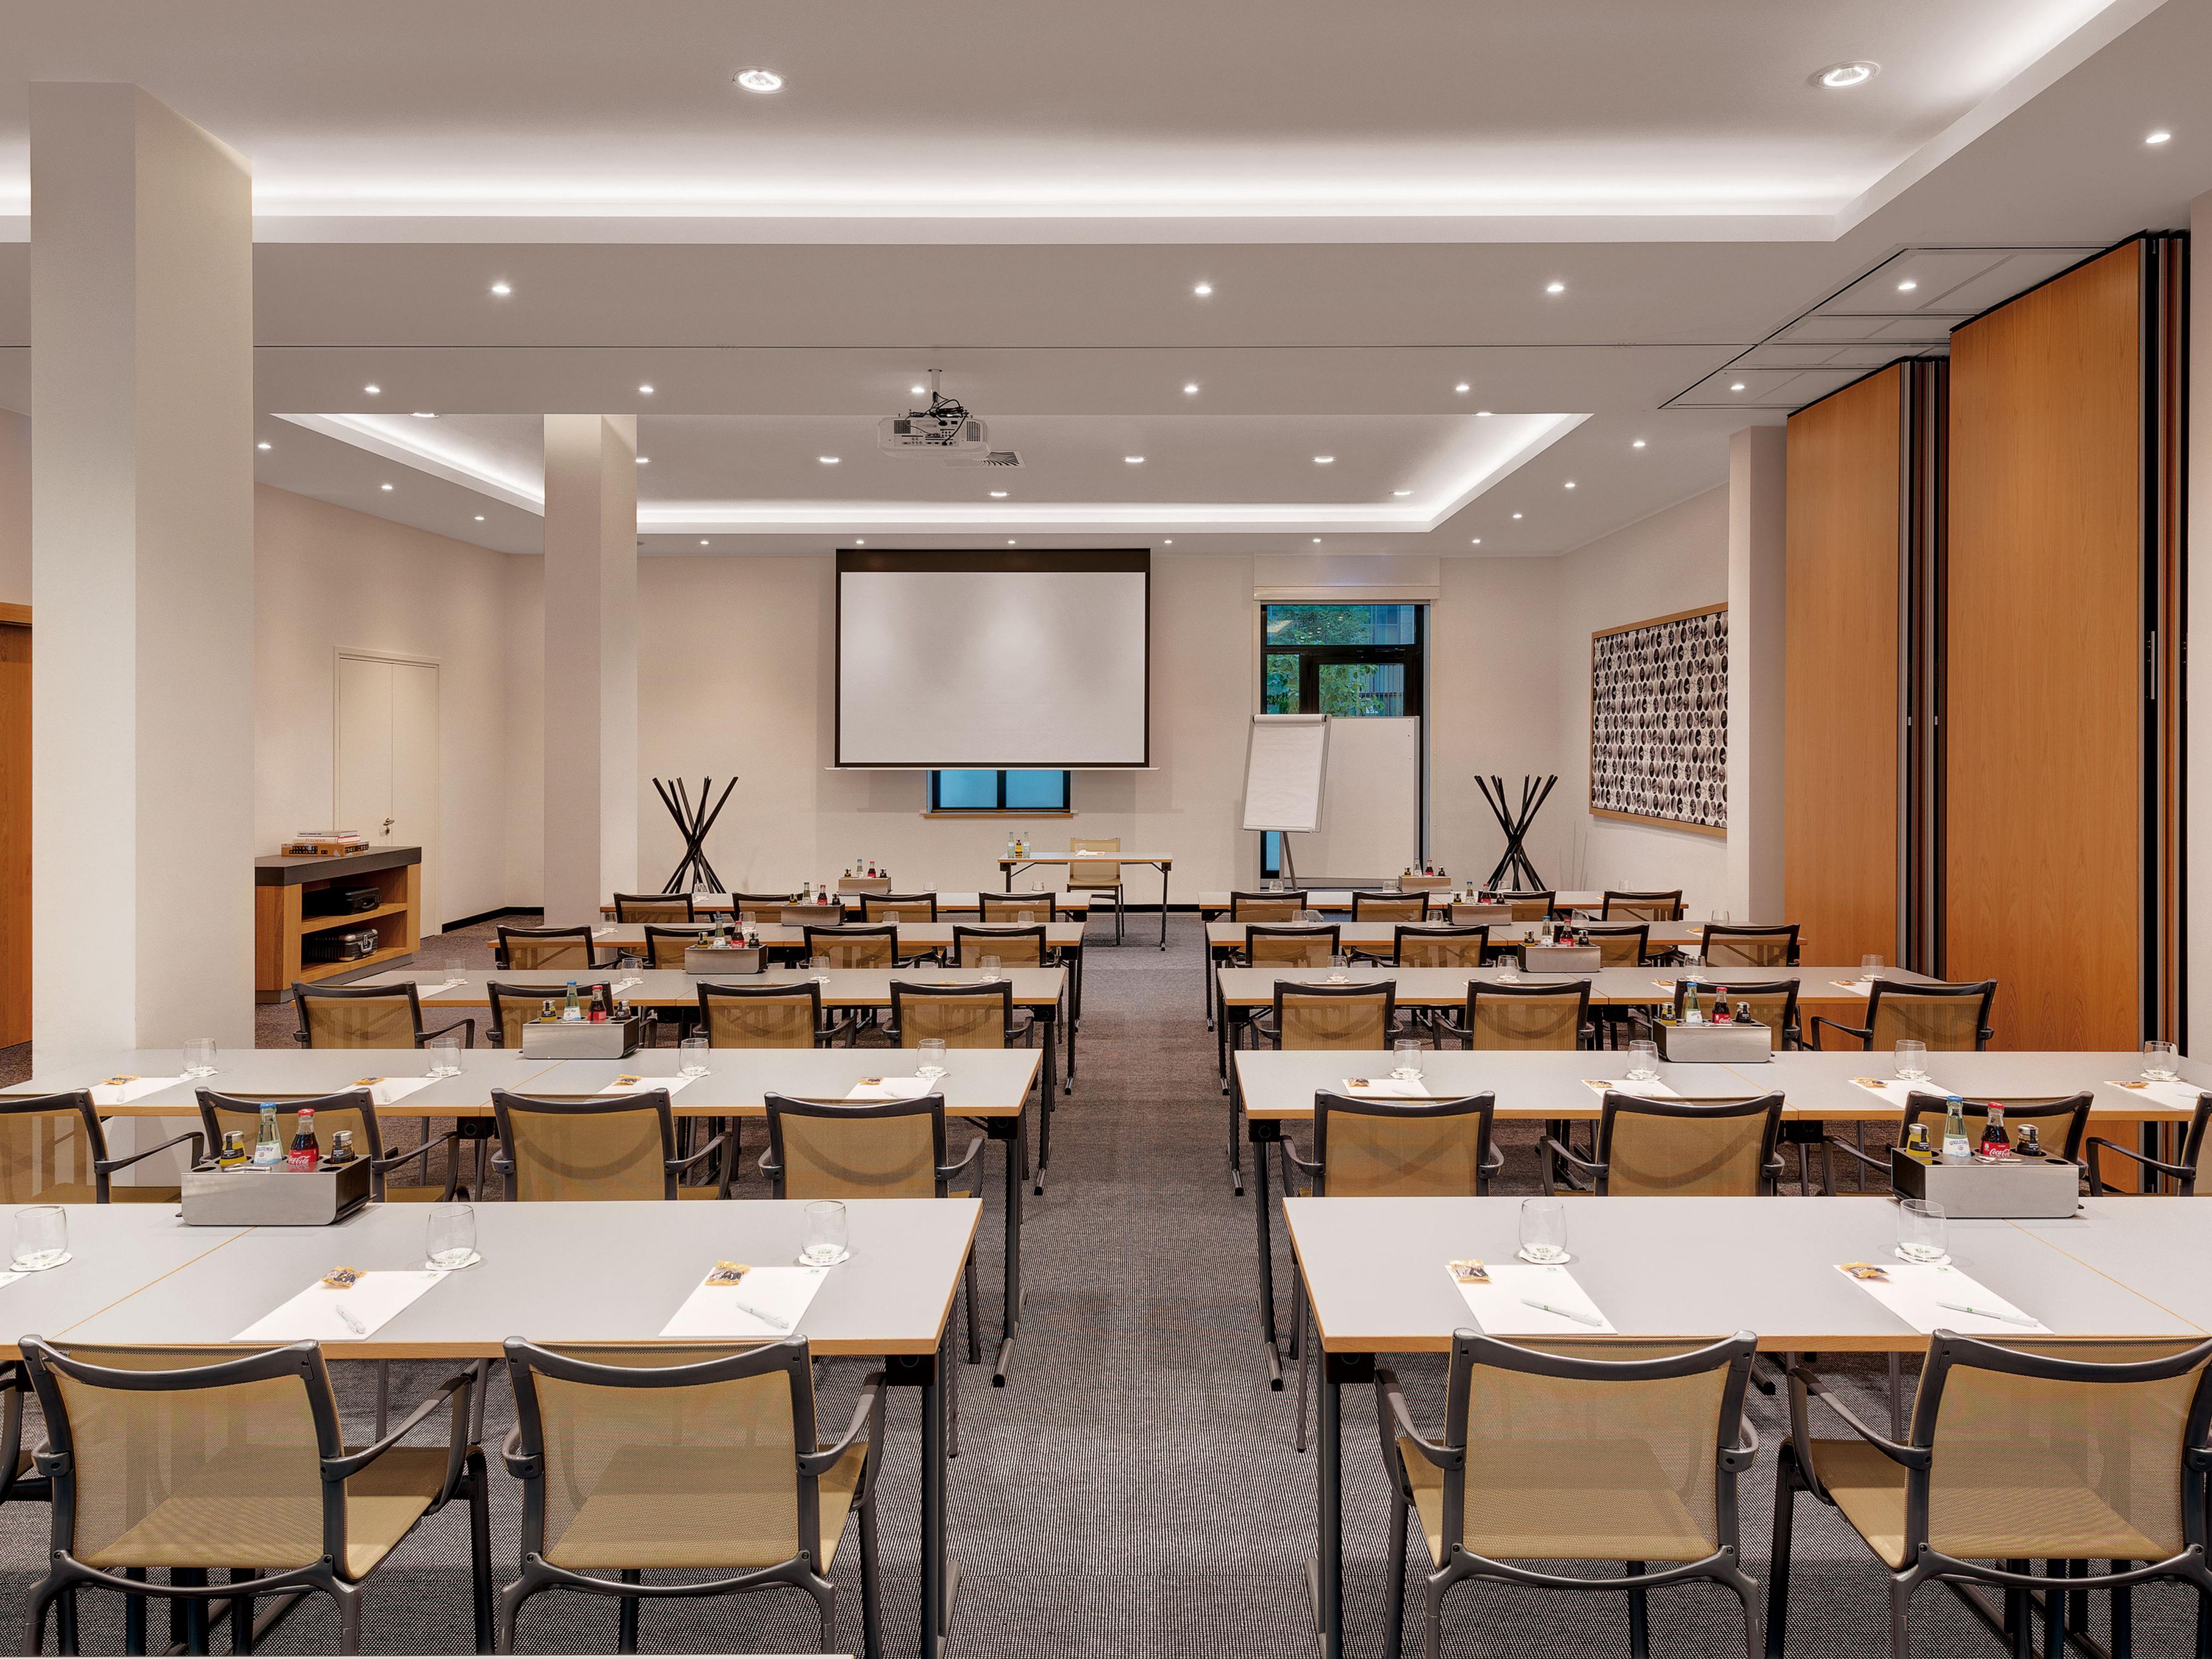 With flexible layouts and natural light, our two meeting spaces can accommodate up to 90 people for business in Frankfurt. Our venue also features audiovisual equipment, catering, a business centre, and an E-Bar printer in our open lobby.